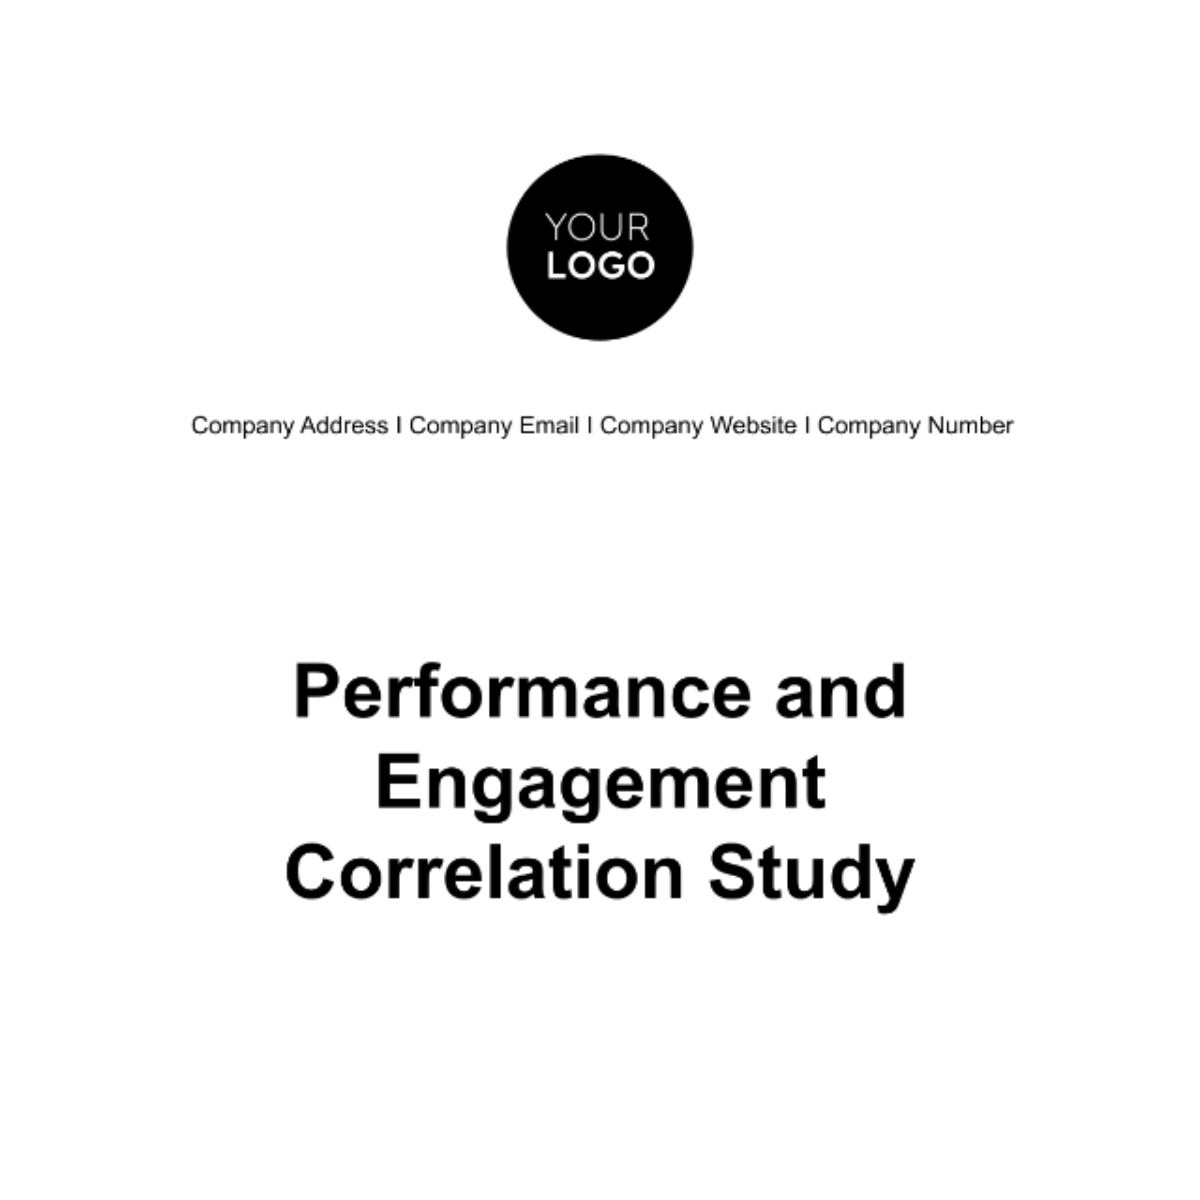 Free Performance and Engagement Correlation Study HR Template